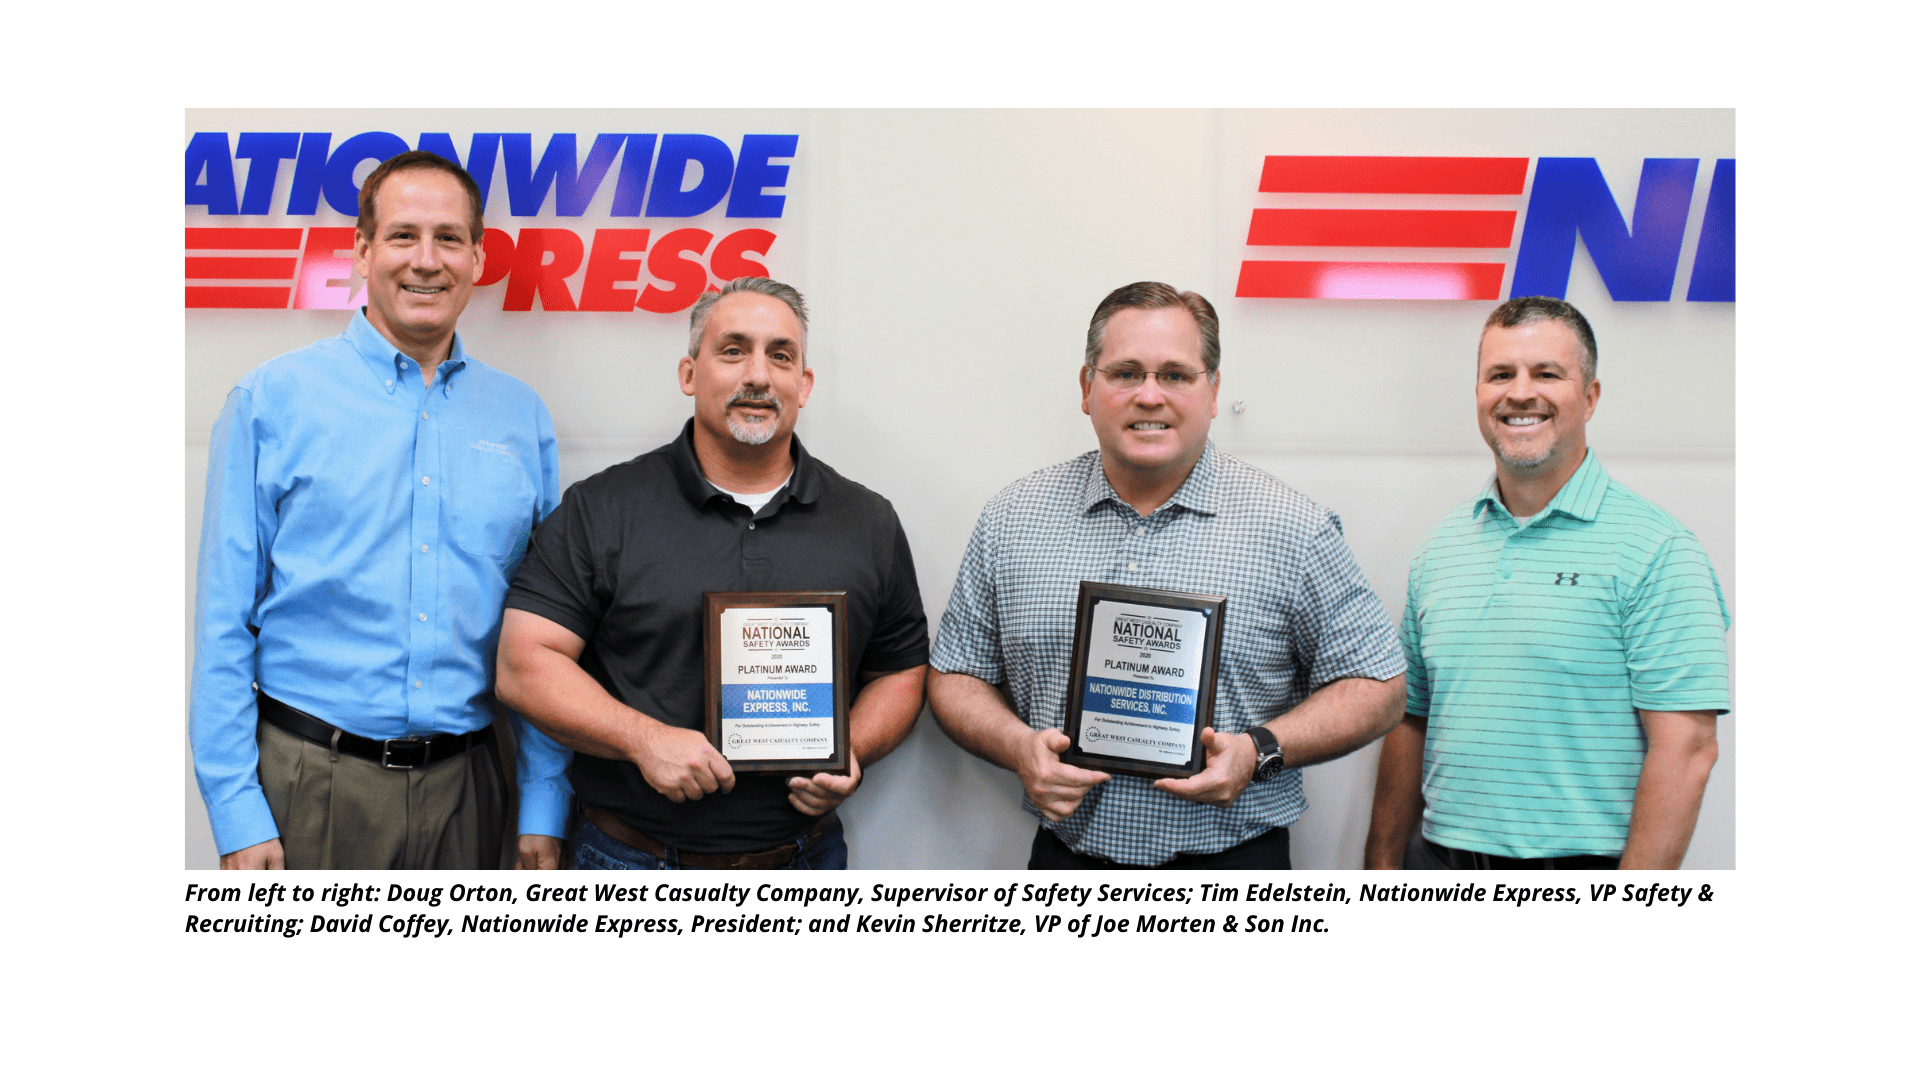 GWCC Platinum Safety Award for Leadership team at Nationwide Express, a 3PL Logistics, Warehousing, Waste Management, Dry Van Trucking Company, Hazmat Trucking Company, Dumpster Rental, Roll off Truck, End Dump Truck Service, and Scrap Metal Haul Off